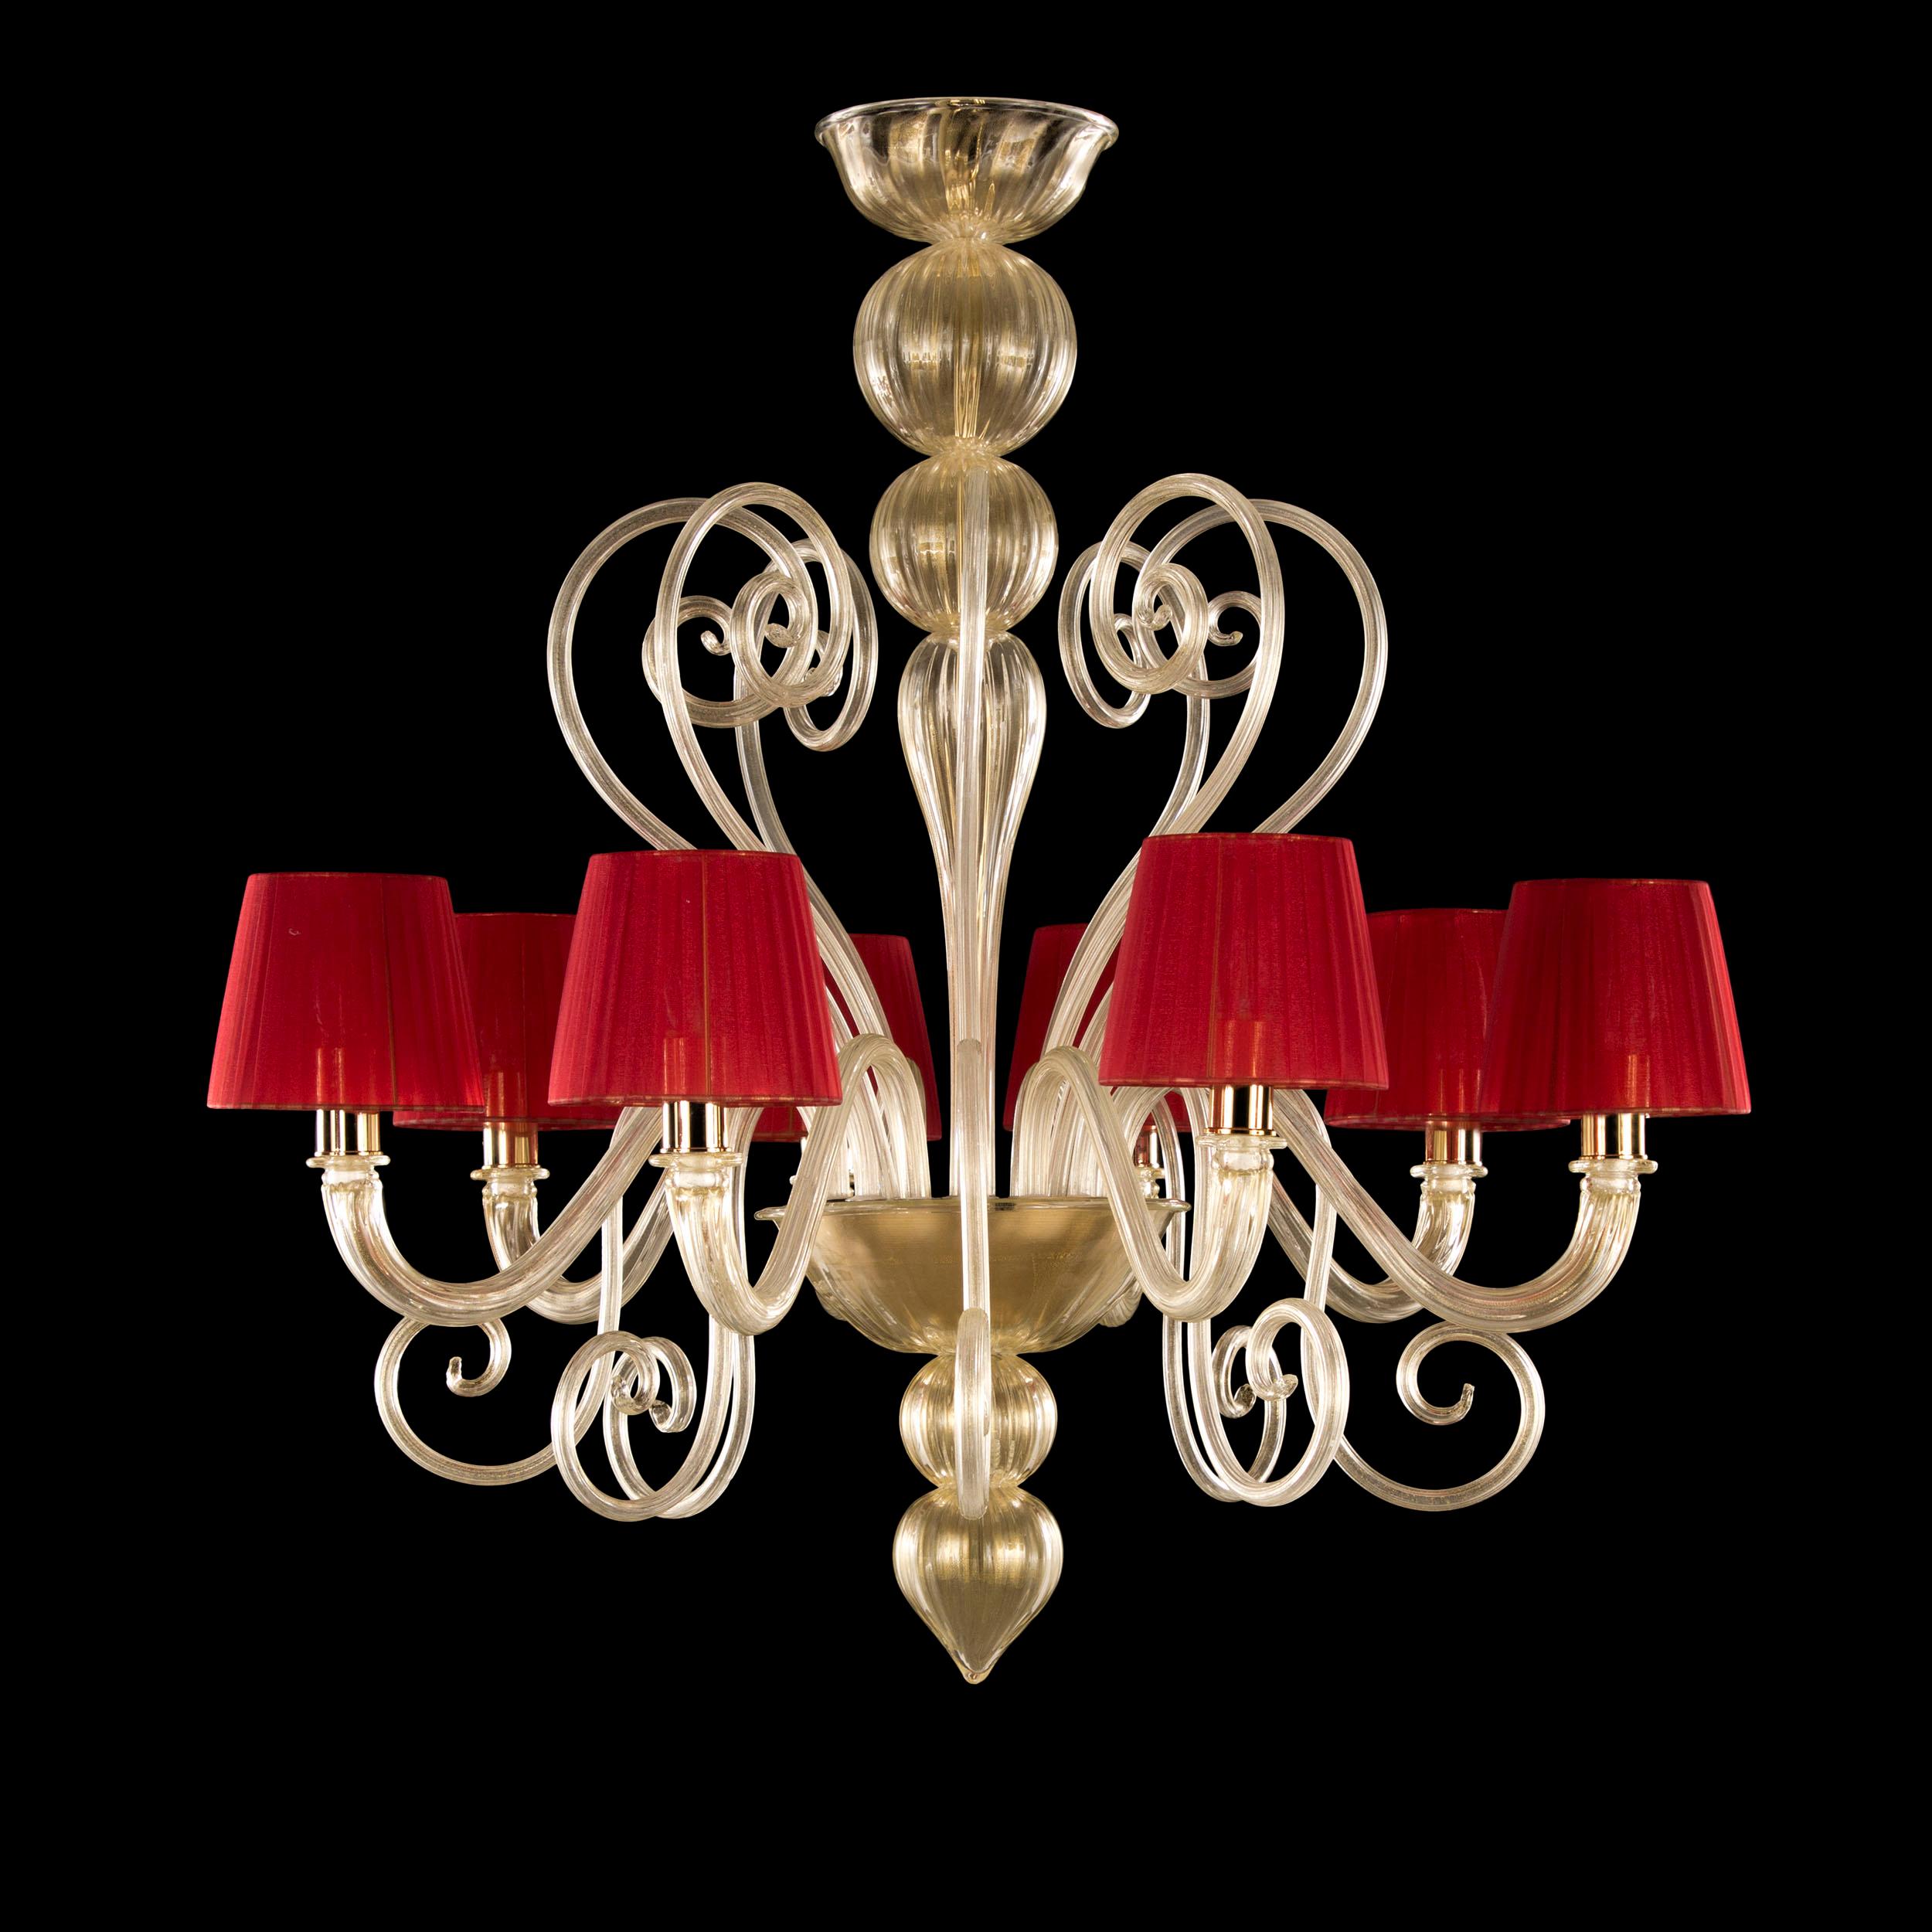 Artistic Chandelier 8 Arms Golden Leaf Murano Glass and Lampshades by Multiforme For Sale 4